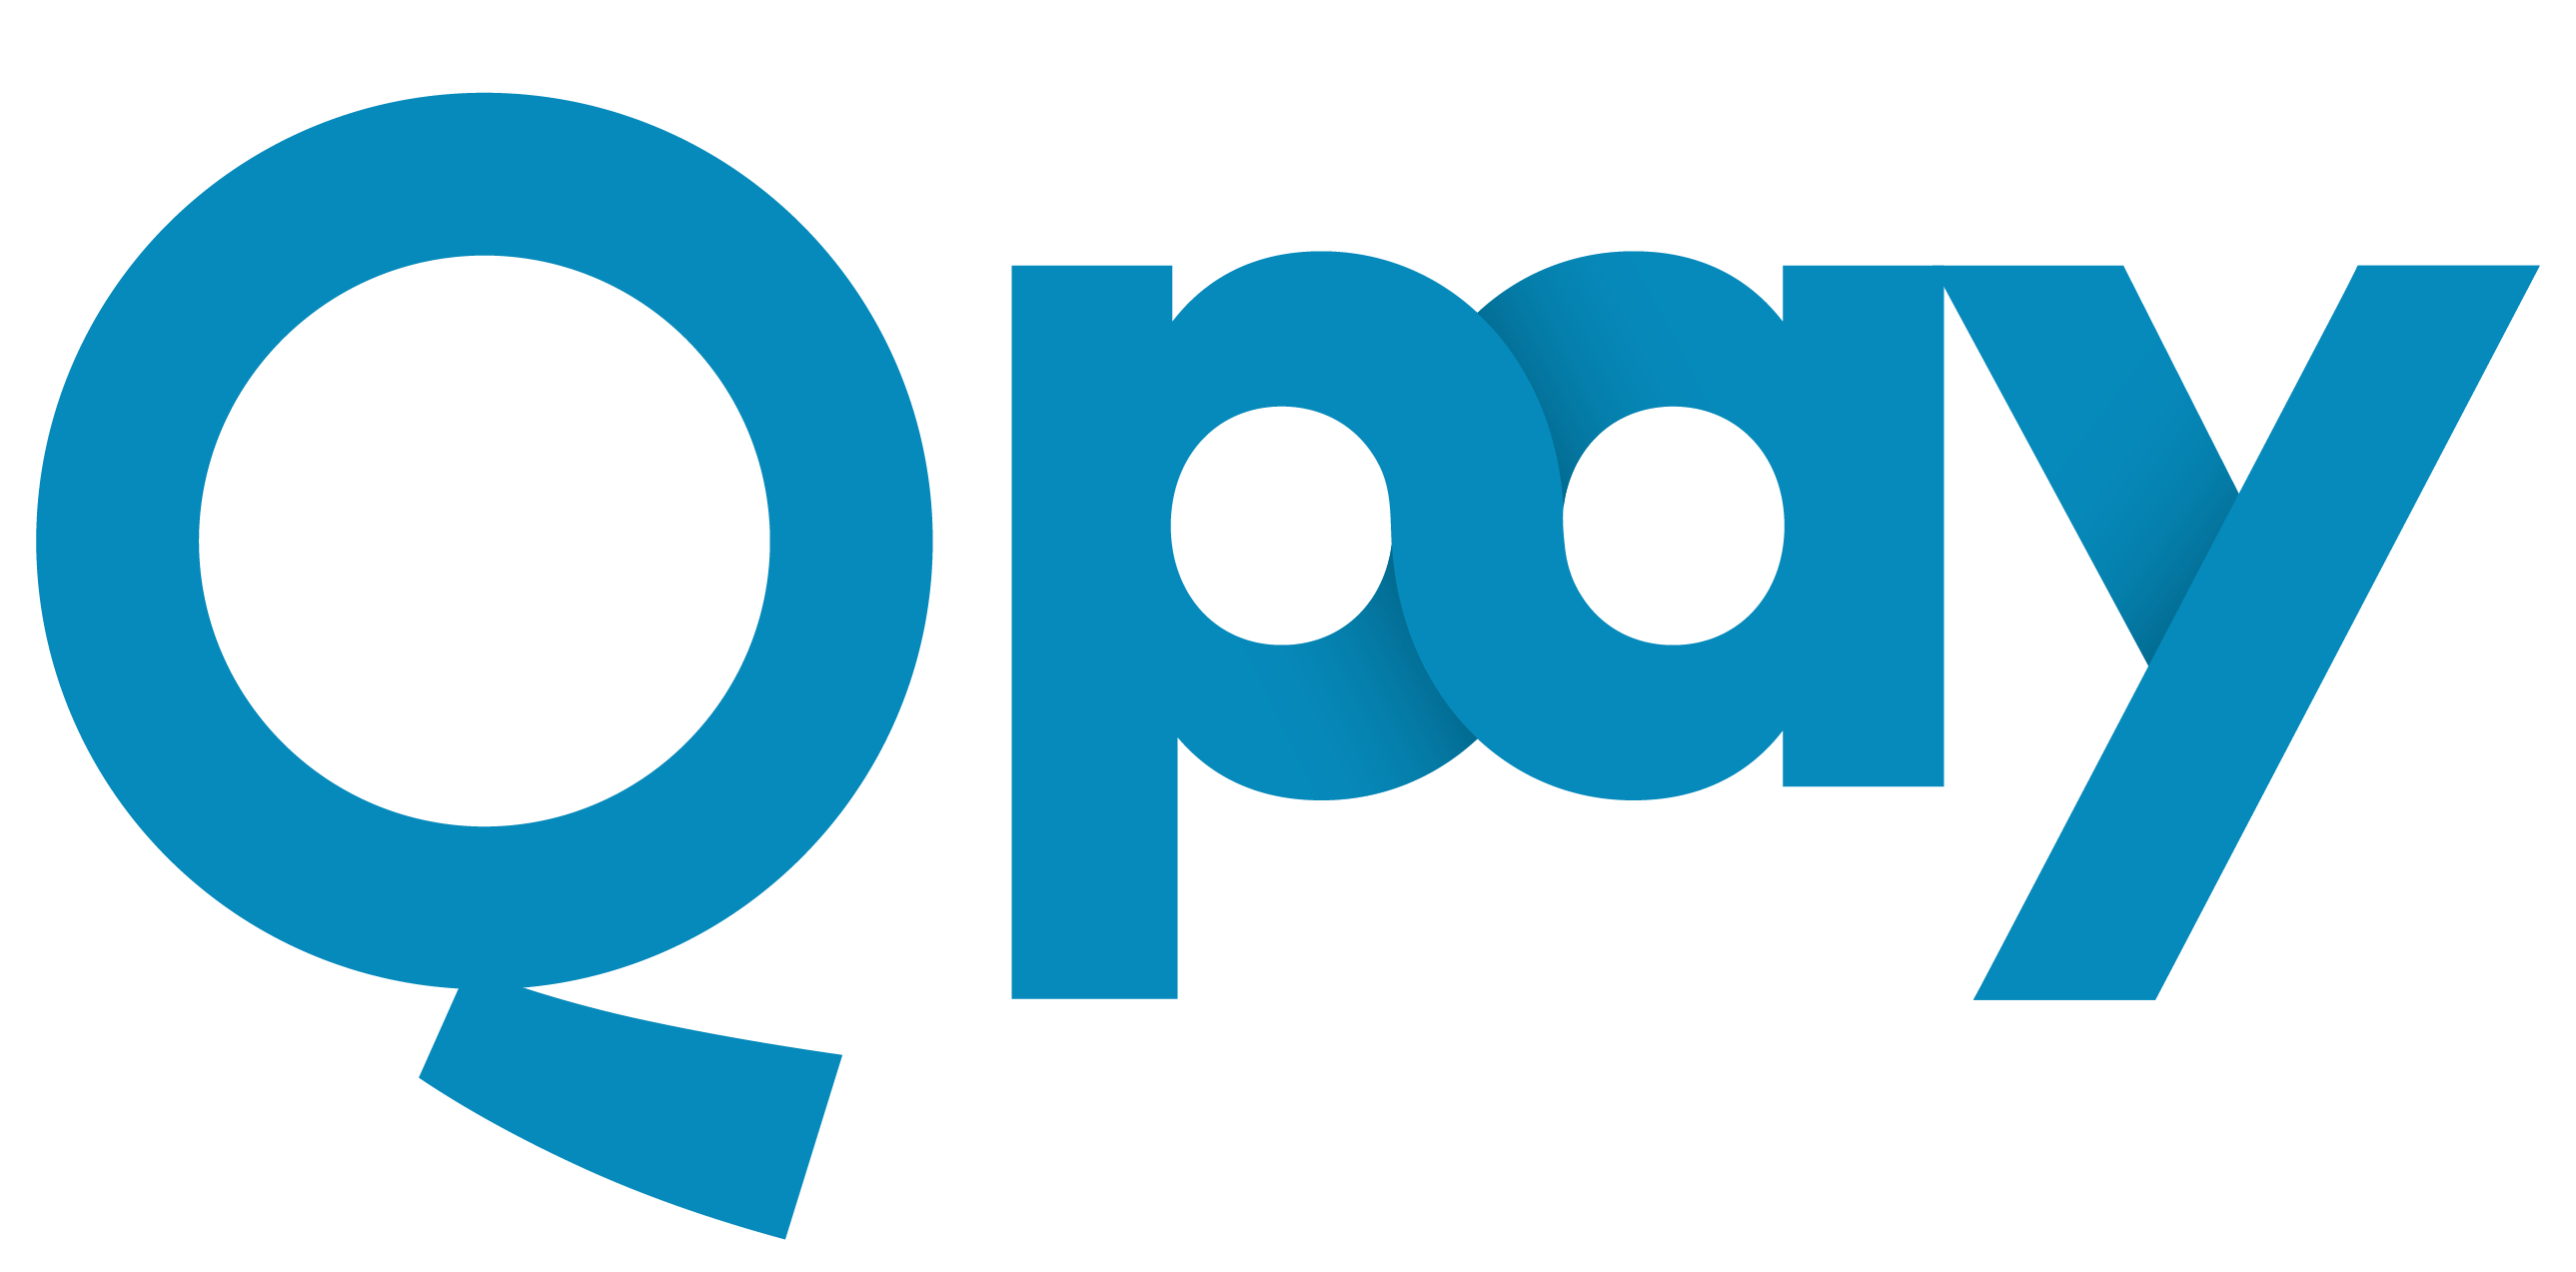 QPay